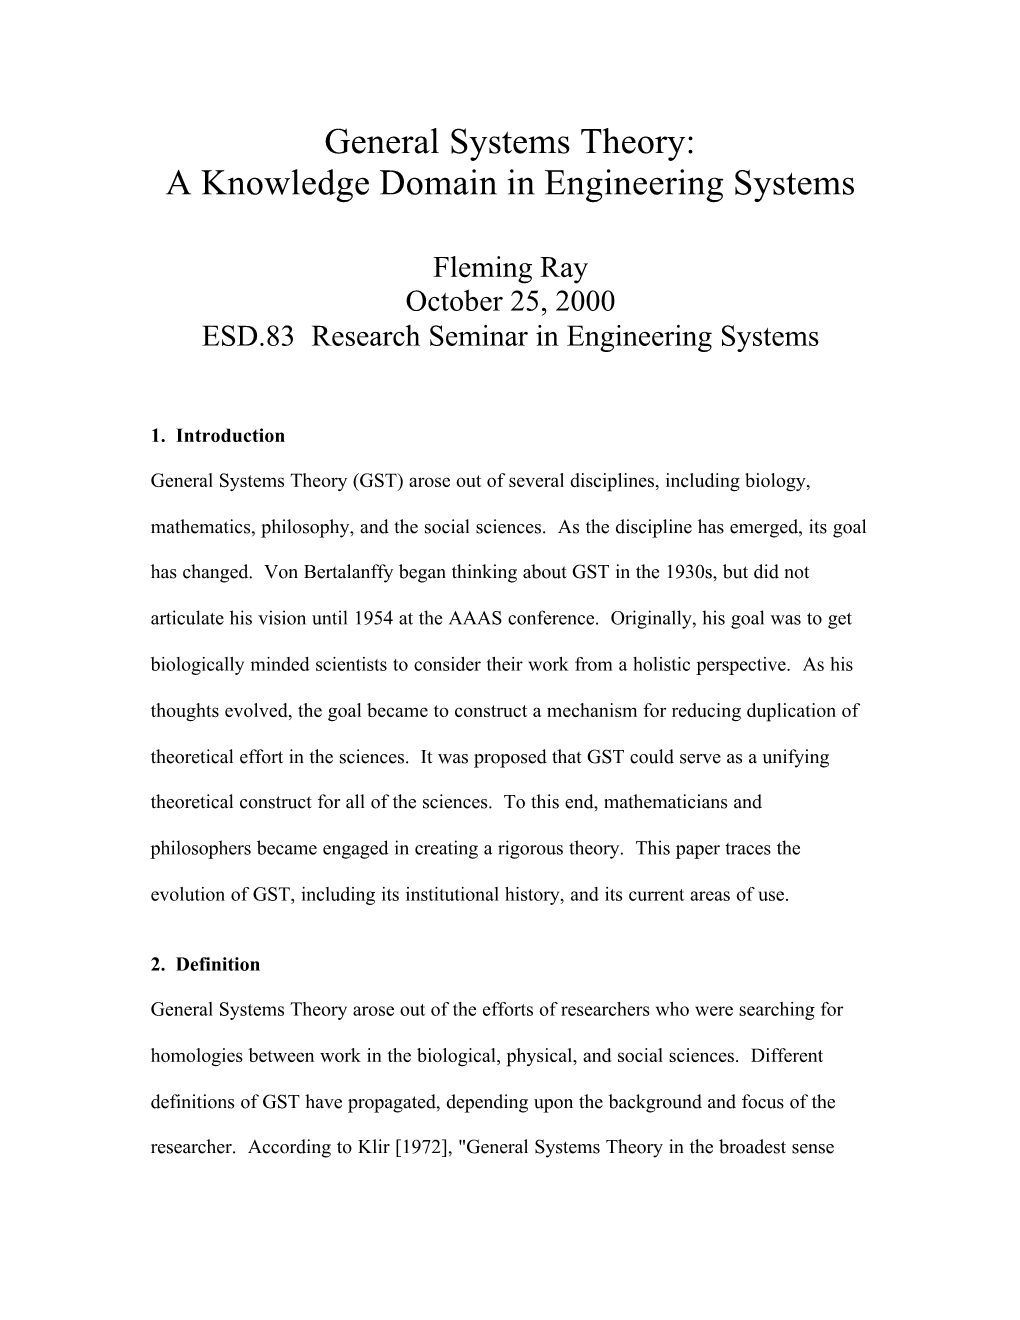 General Systems Theory: a Knowledge Domain in Engineering Systems